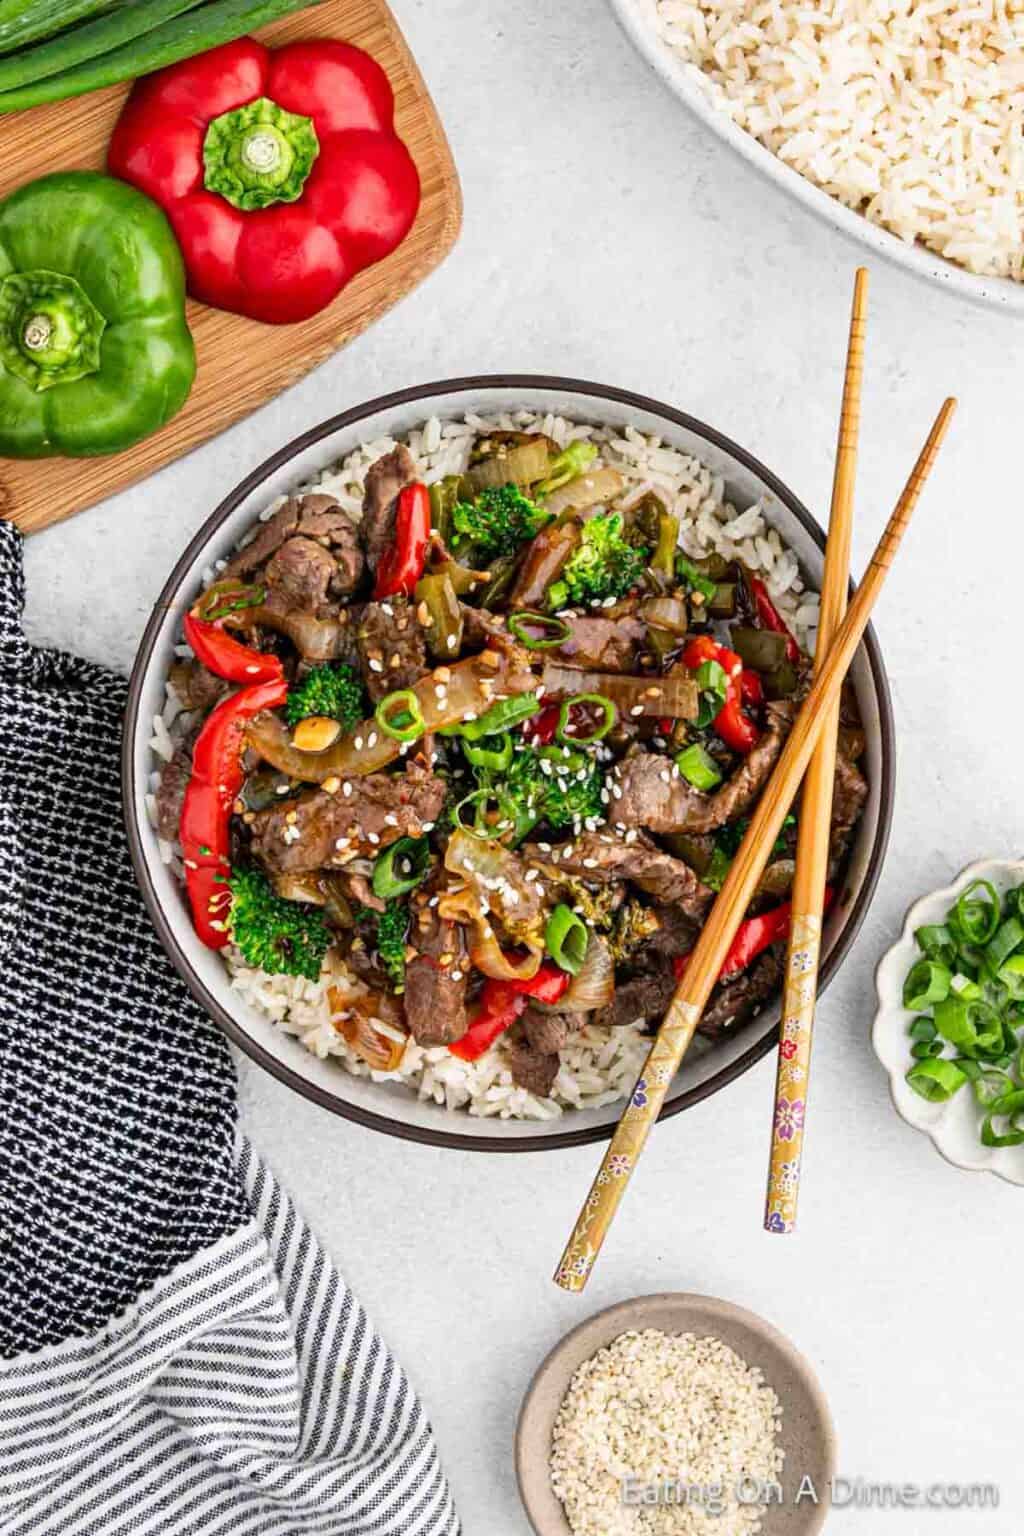 Instant pot beef stir fry - Ready in only 5 minutes for a delicious dinner